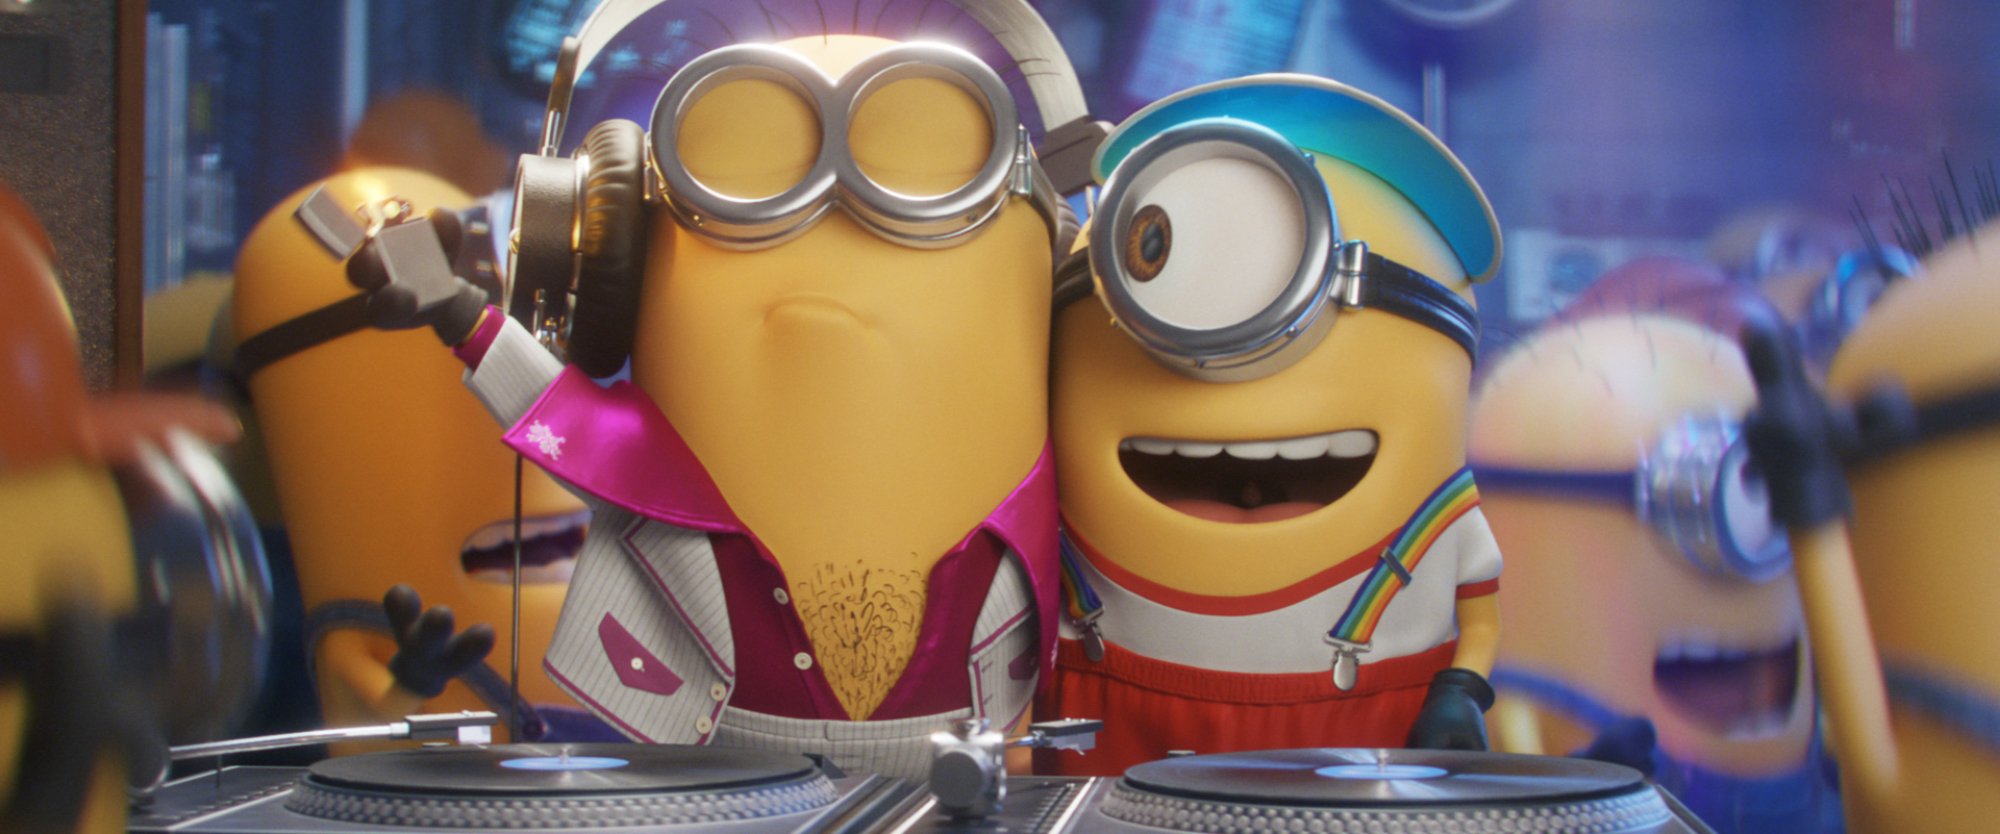 'Minions: The Rise of Gru' - minions watch one another by the DJ booth and dancing around